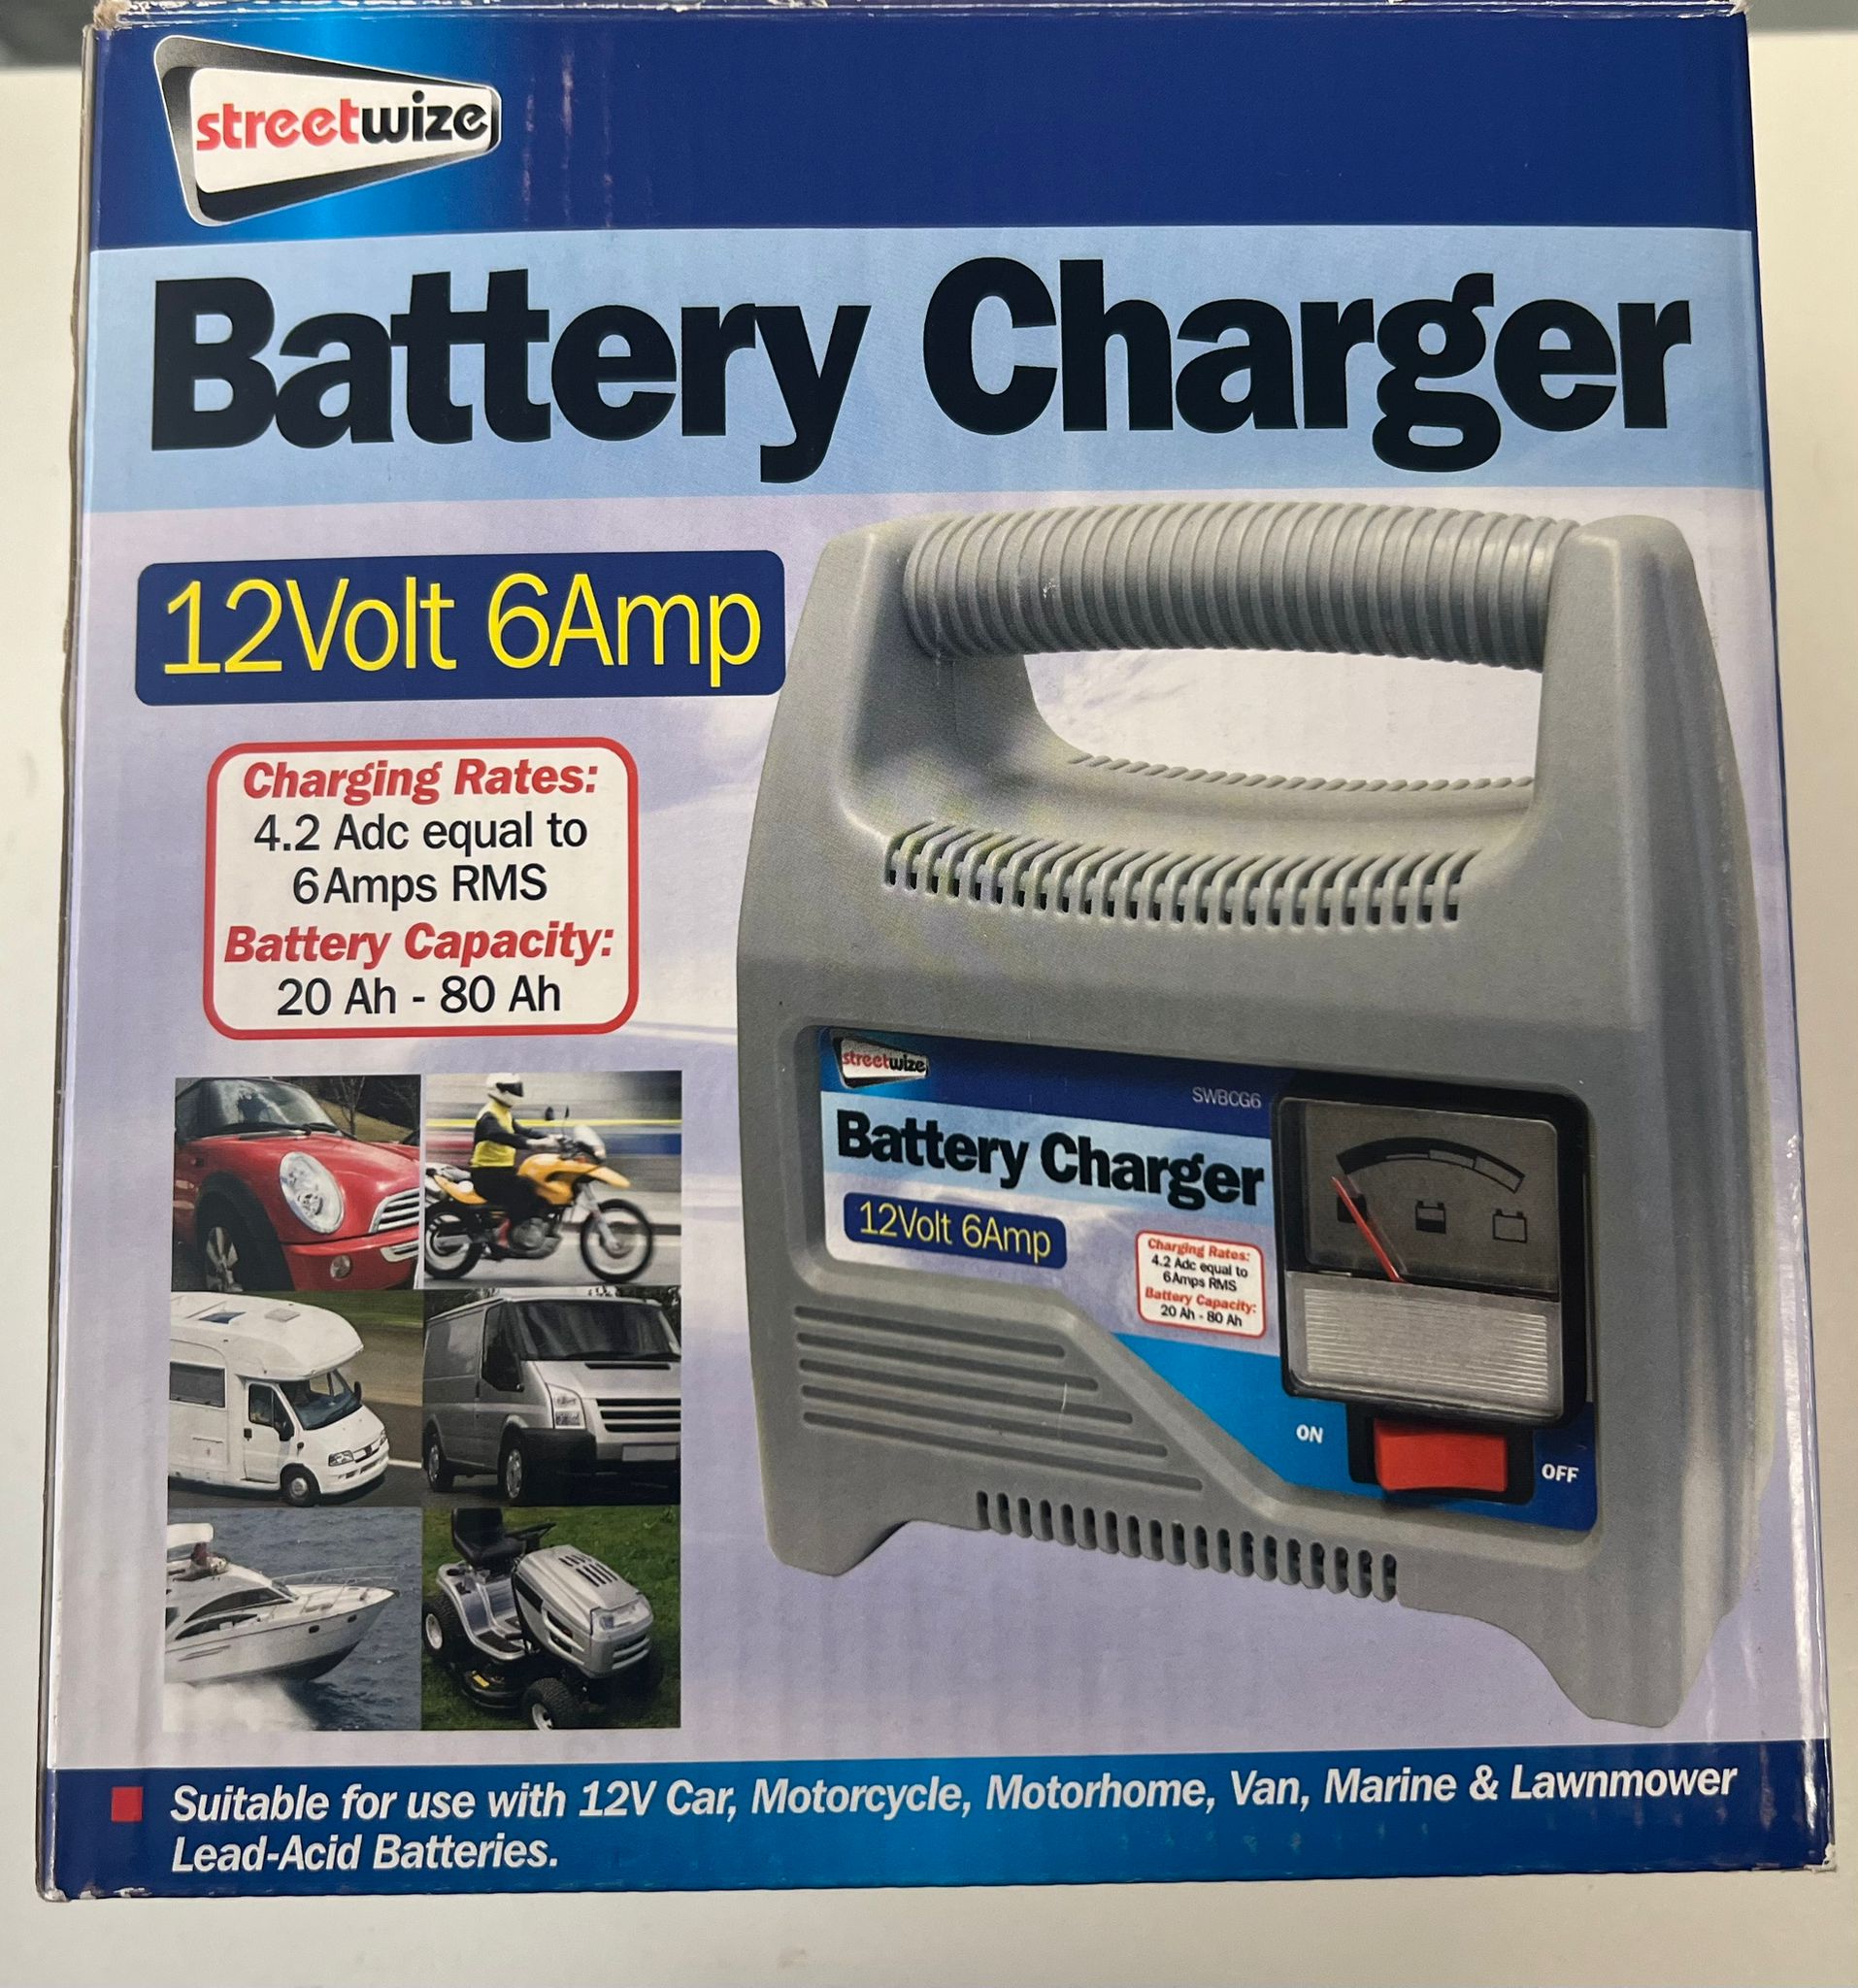 Streetwize Battery Charger 12V 6Amp